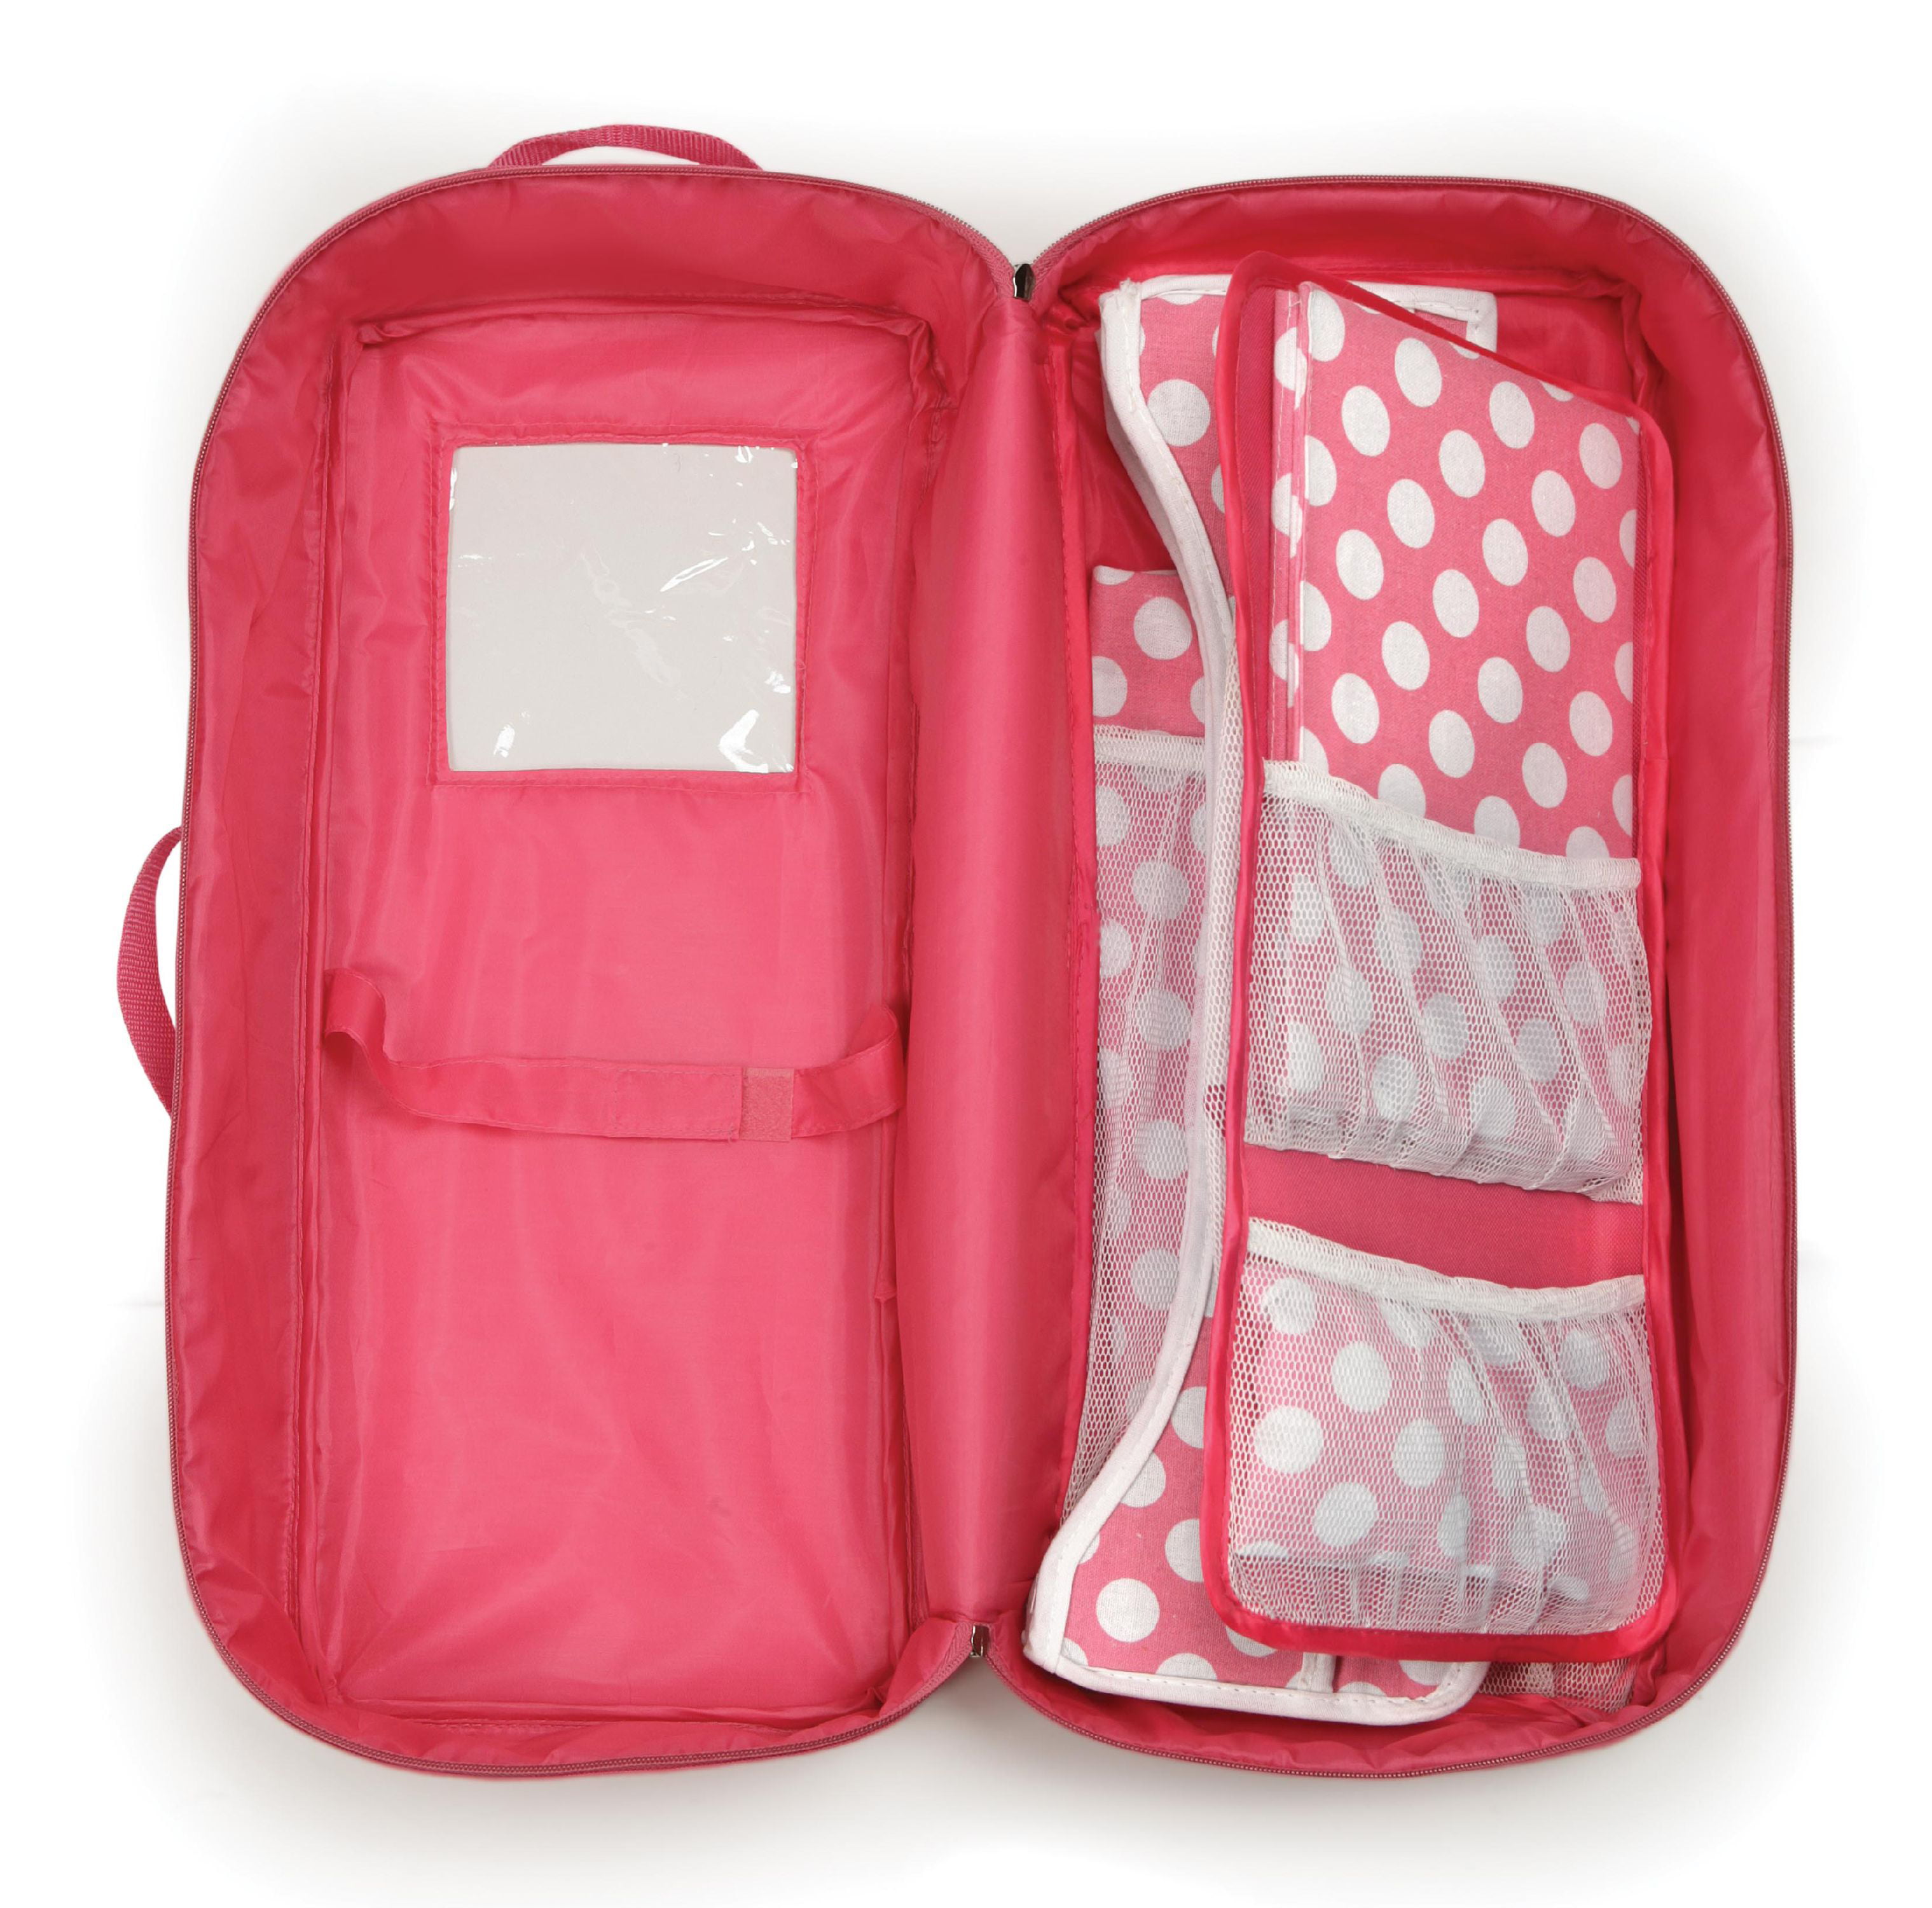 american girl carrying case